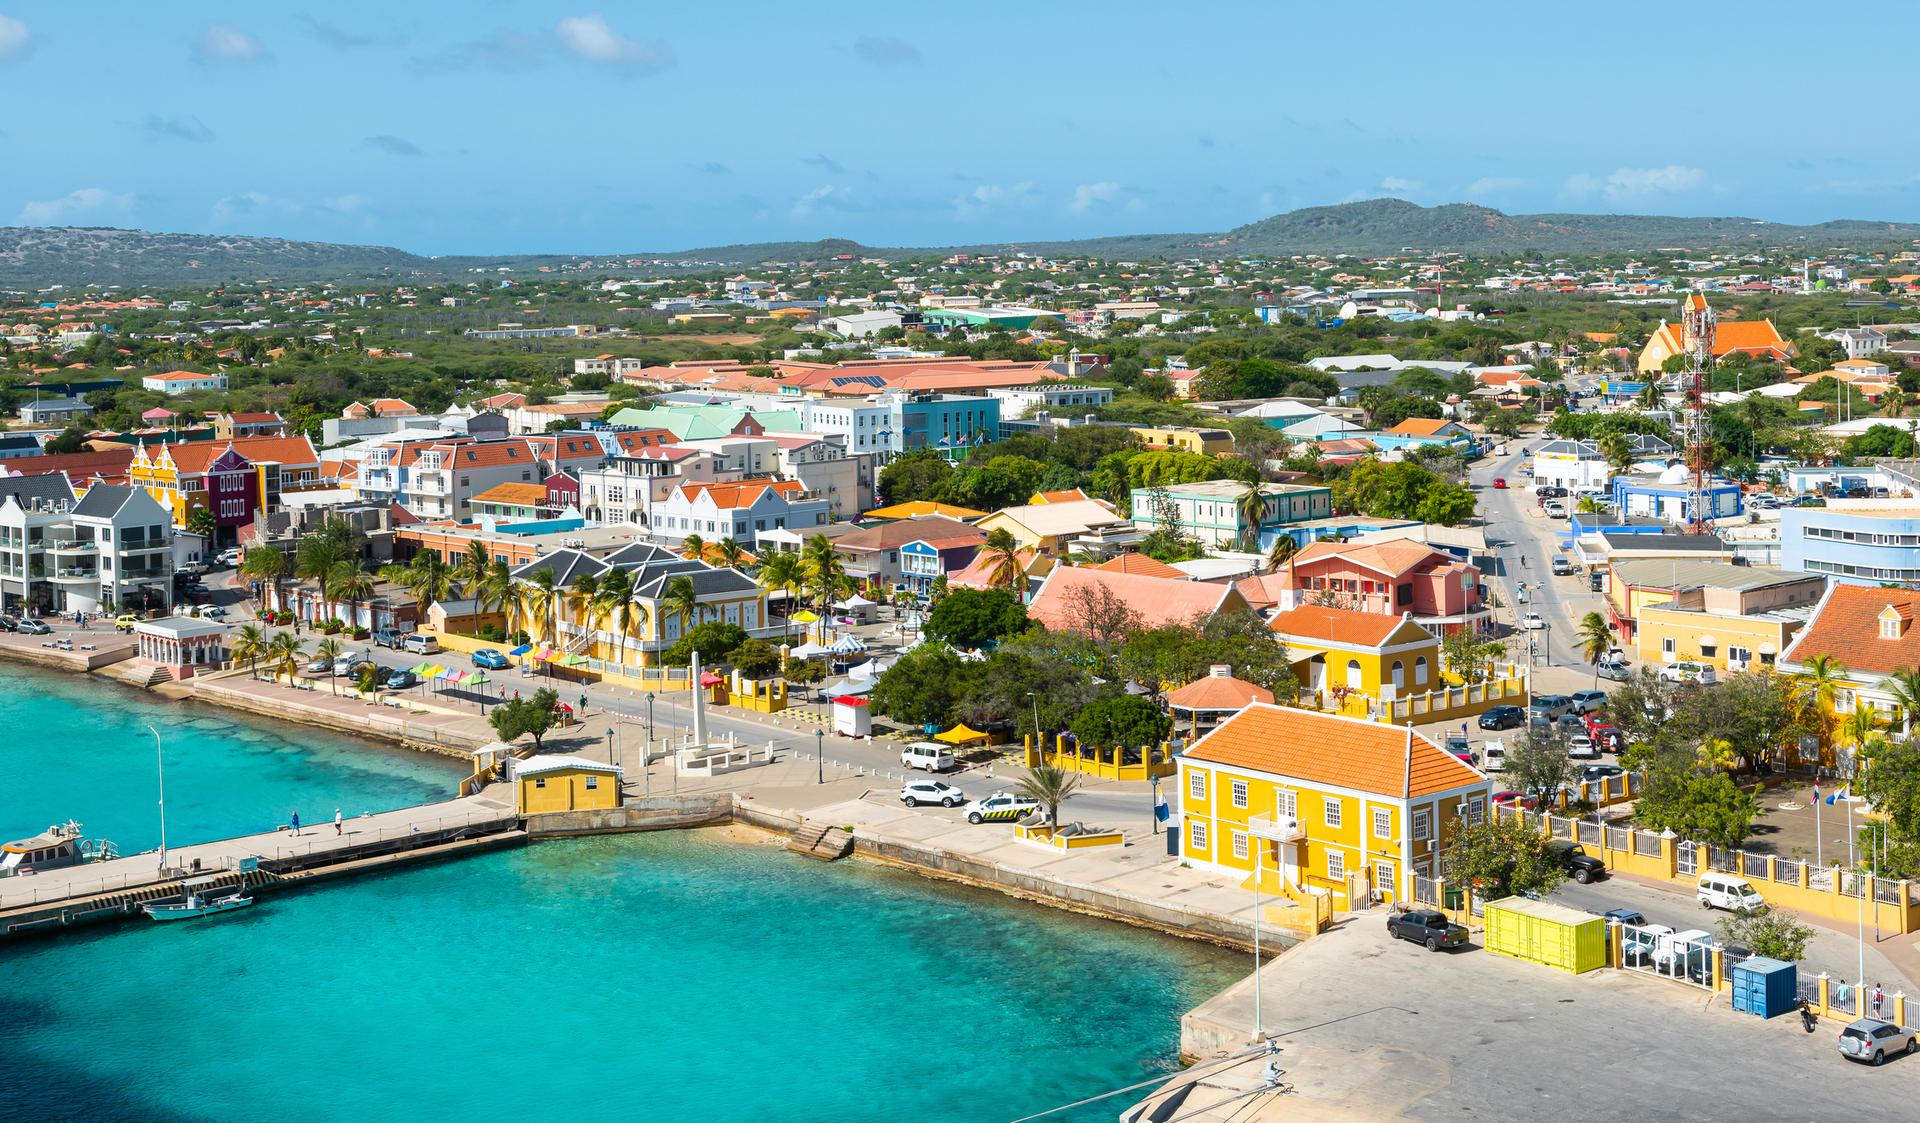 Caribbean Netherlands: maximum permitted loan interest rate to be reduced to 21%